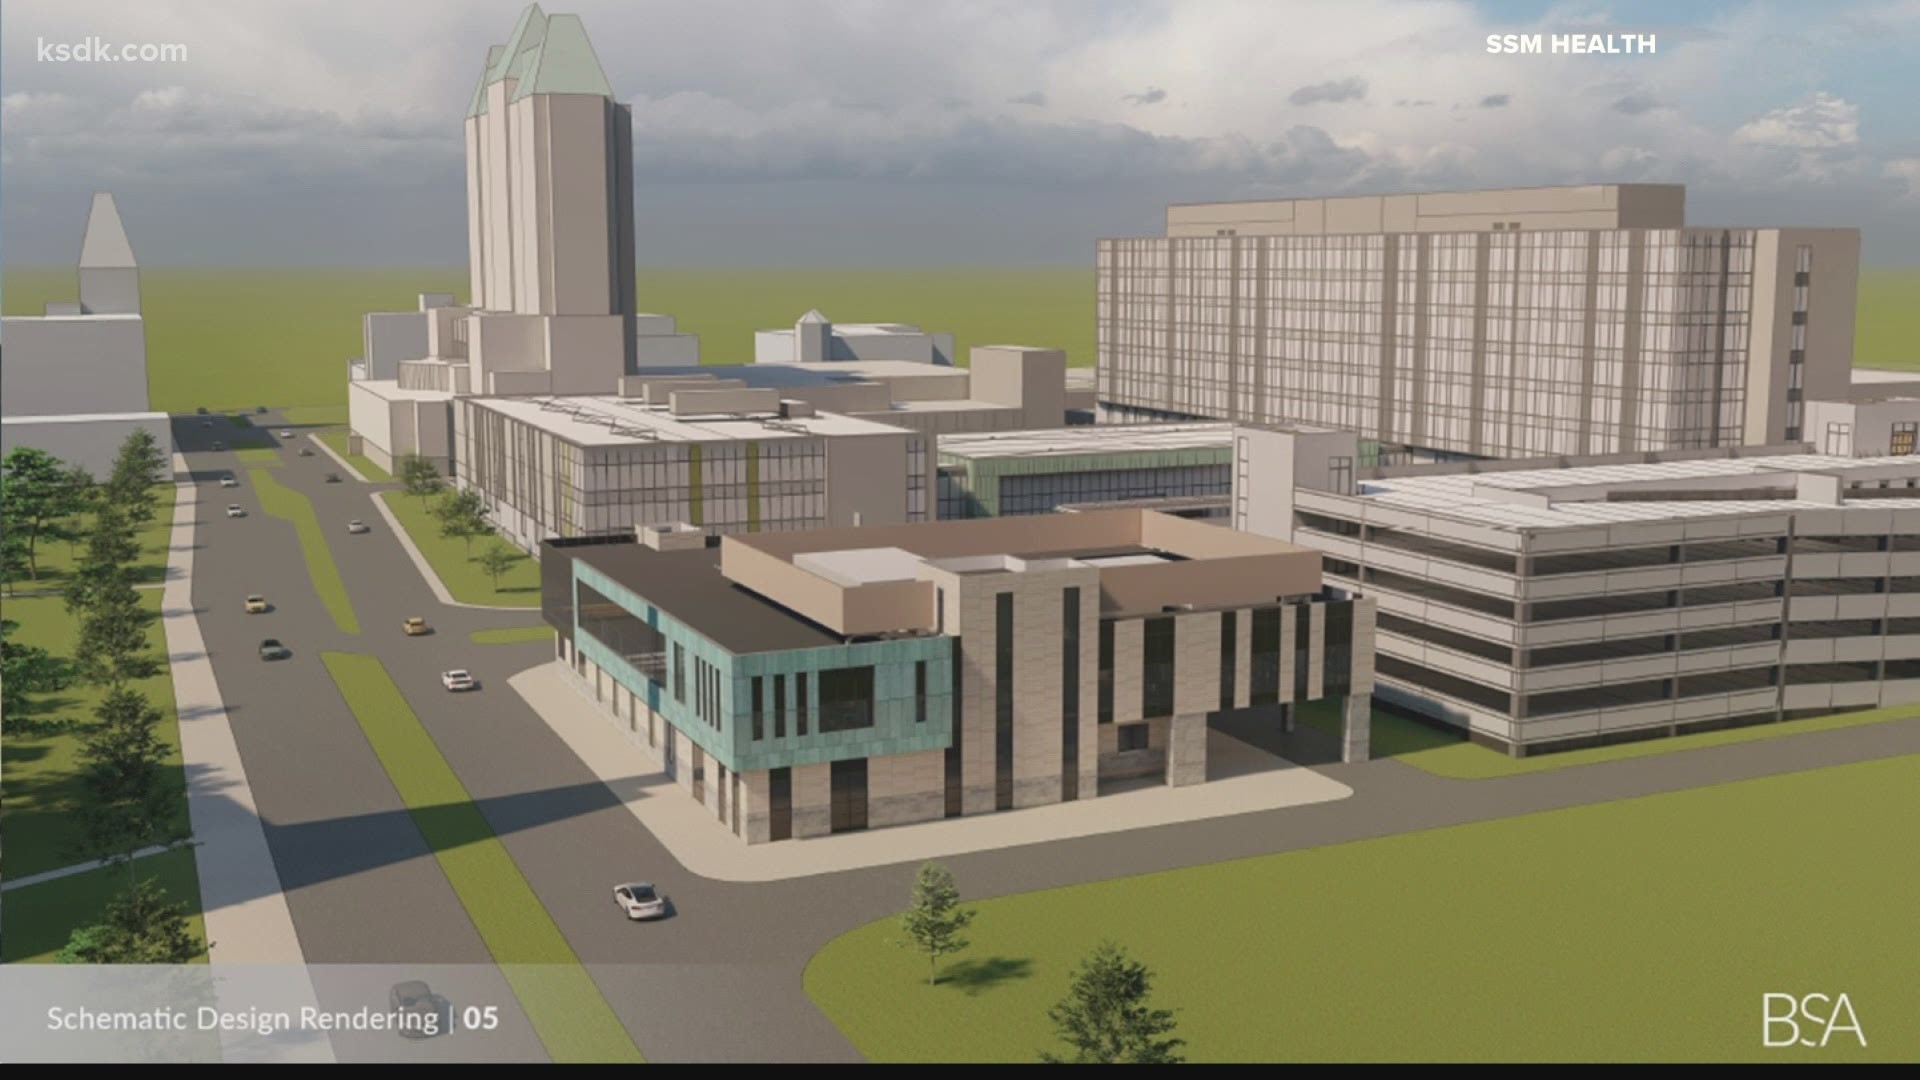 SSM Health announced it's going to break ground on a new Ambulatory Surgery Center for SLU Hospital.